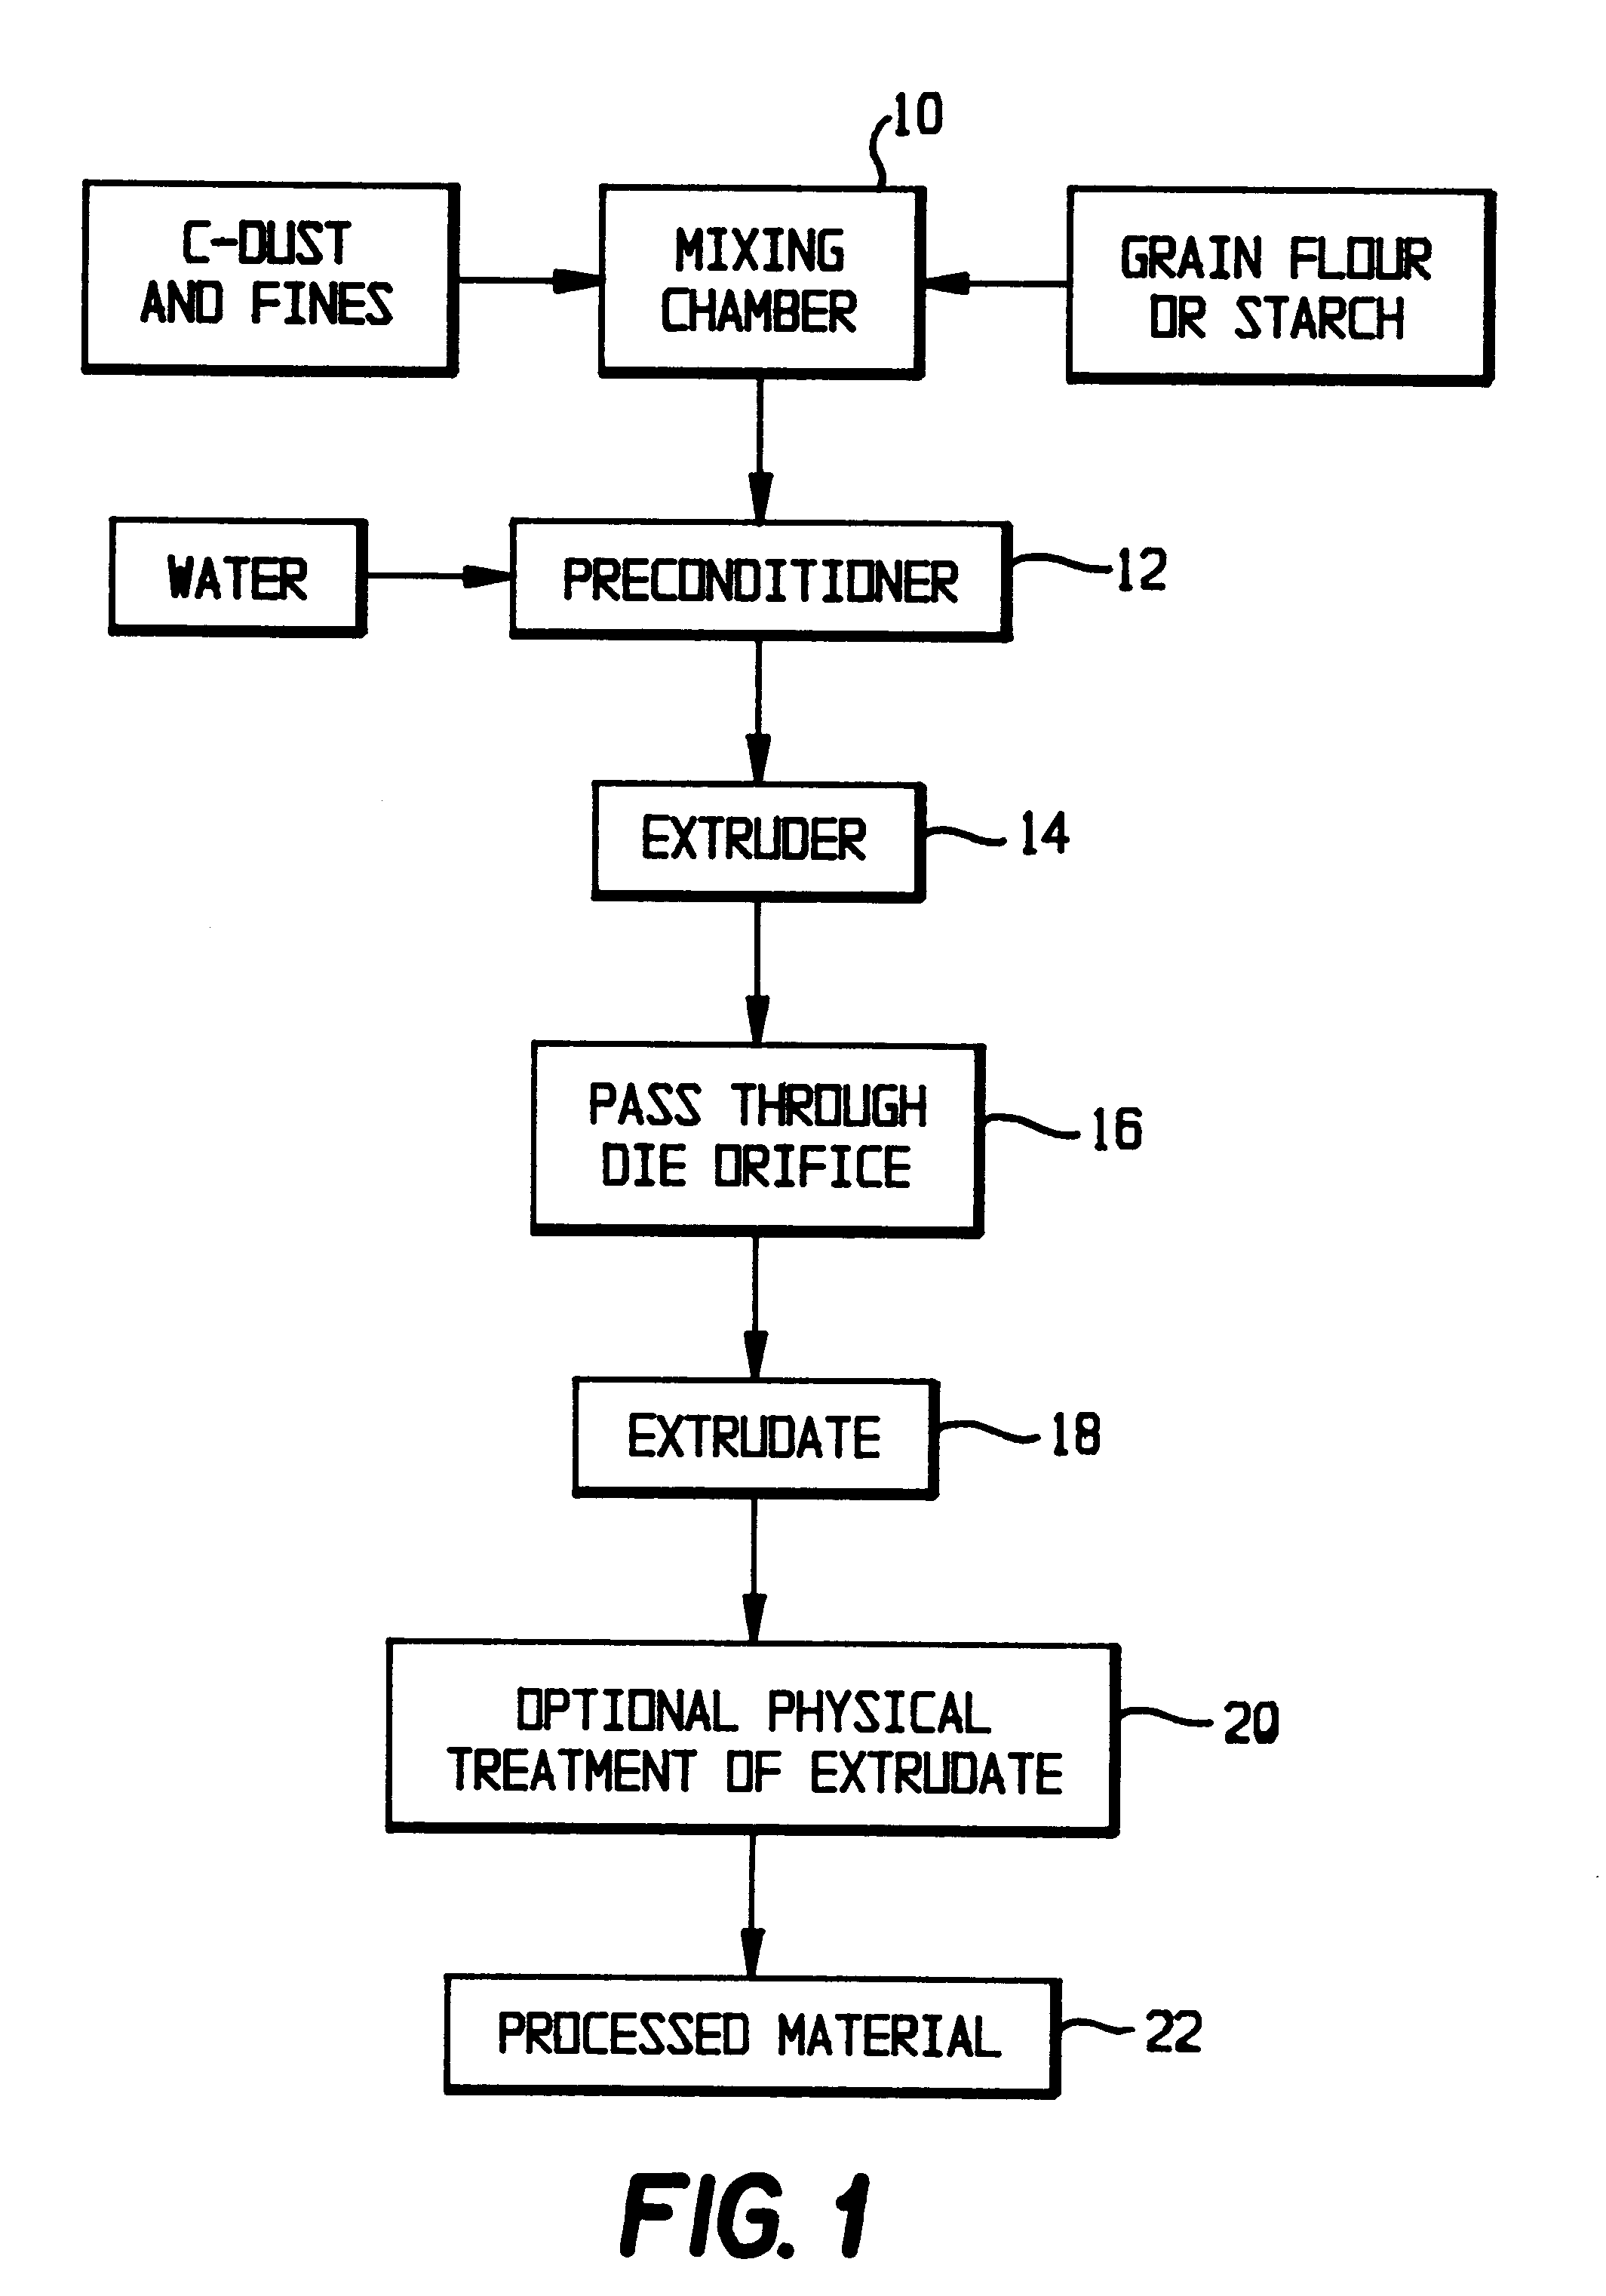 Low-density tobacco filler and a method of making low-density tobacco filler and smoking articles therefrom